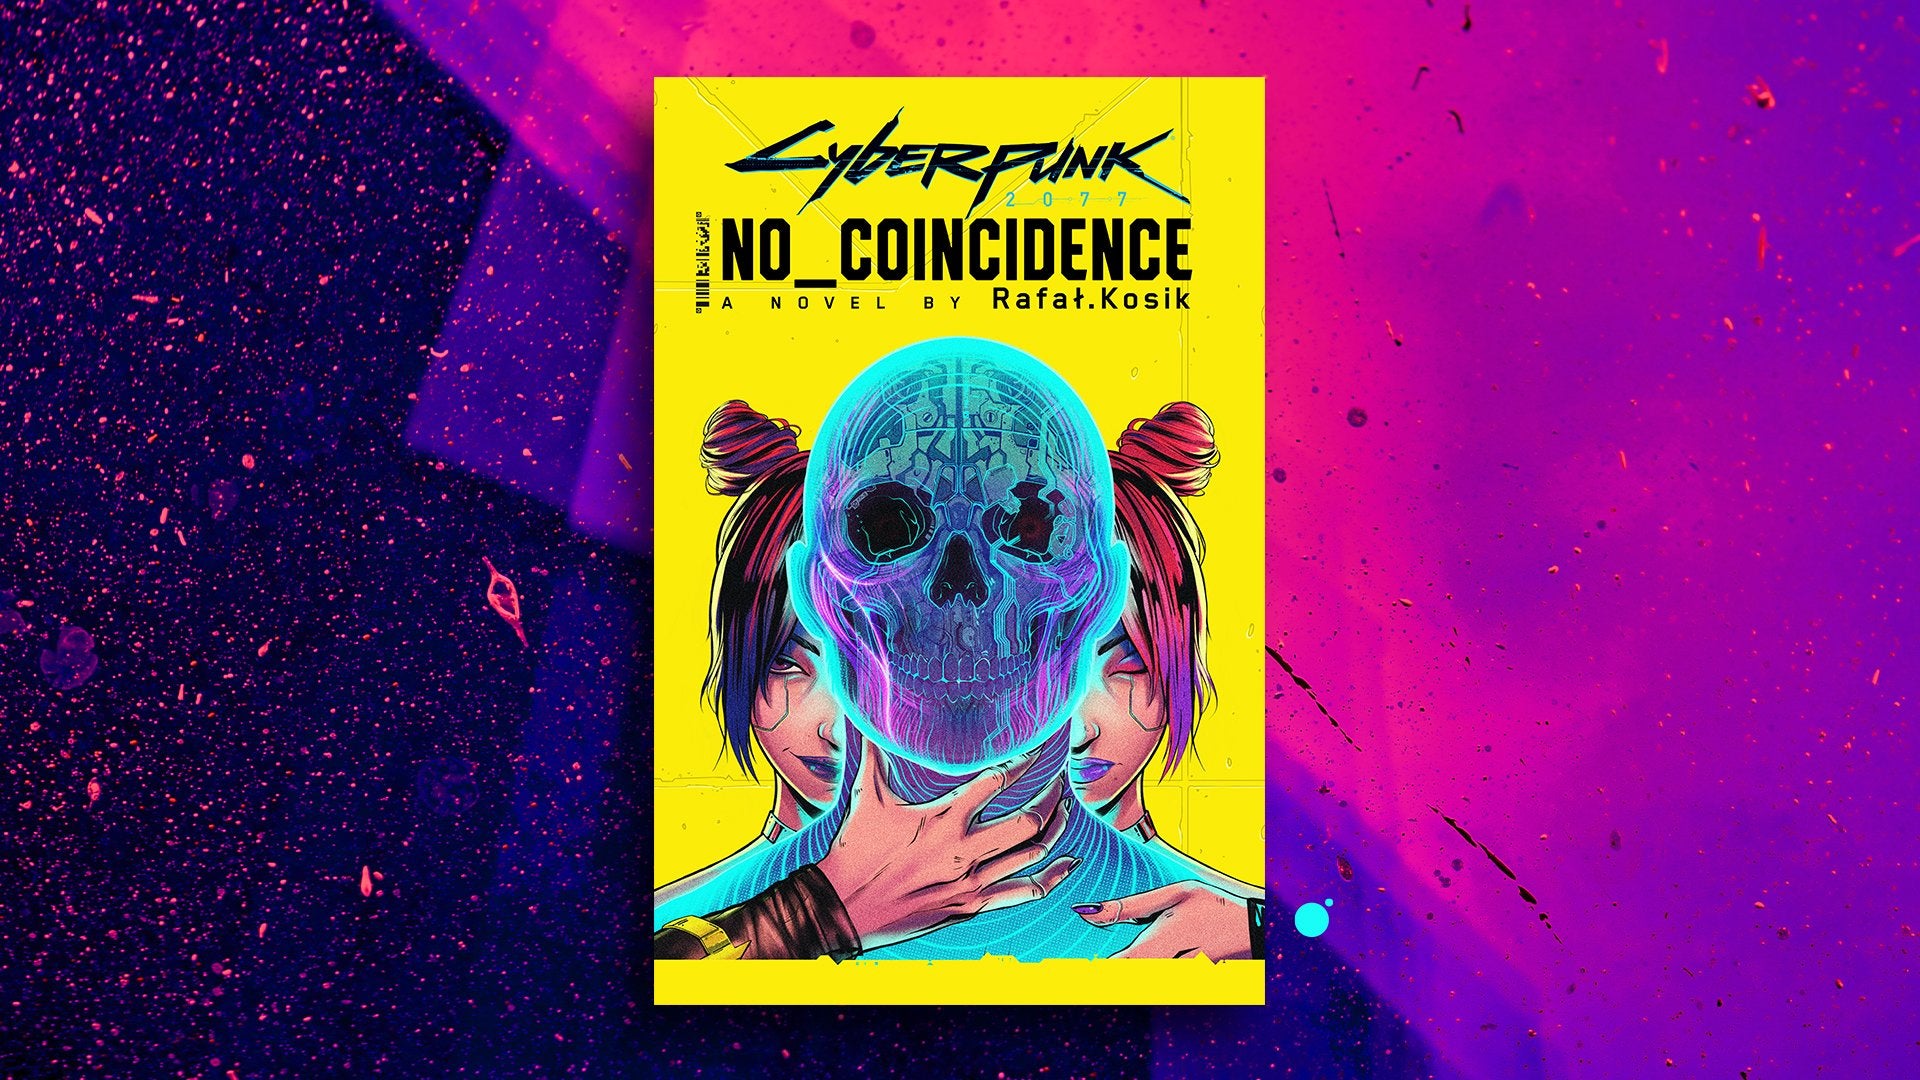 Image for Following its anime spin-off, there's now a Cyberpunk 2077 novel coming next year